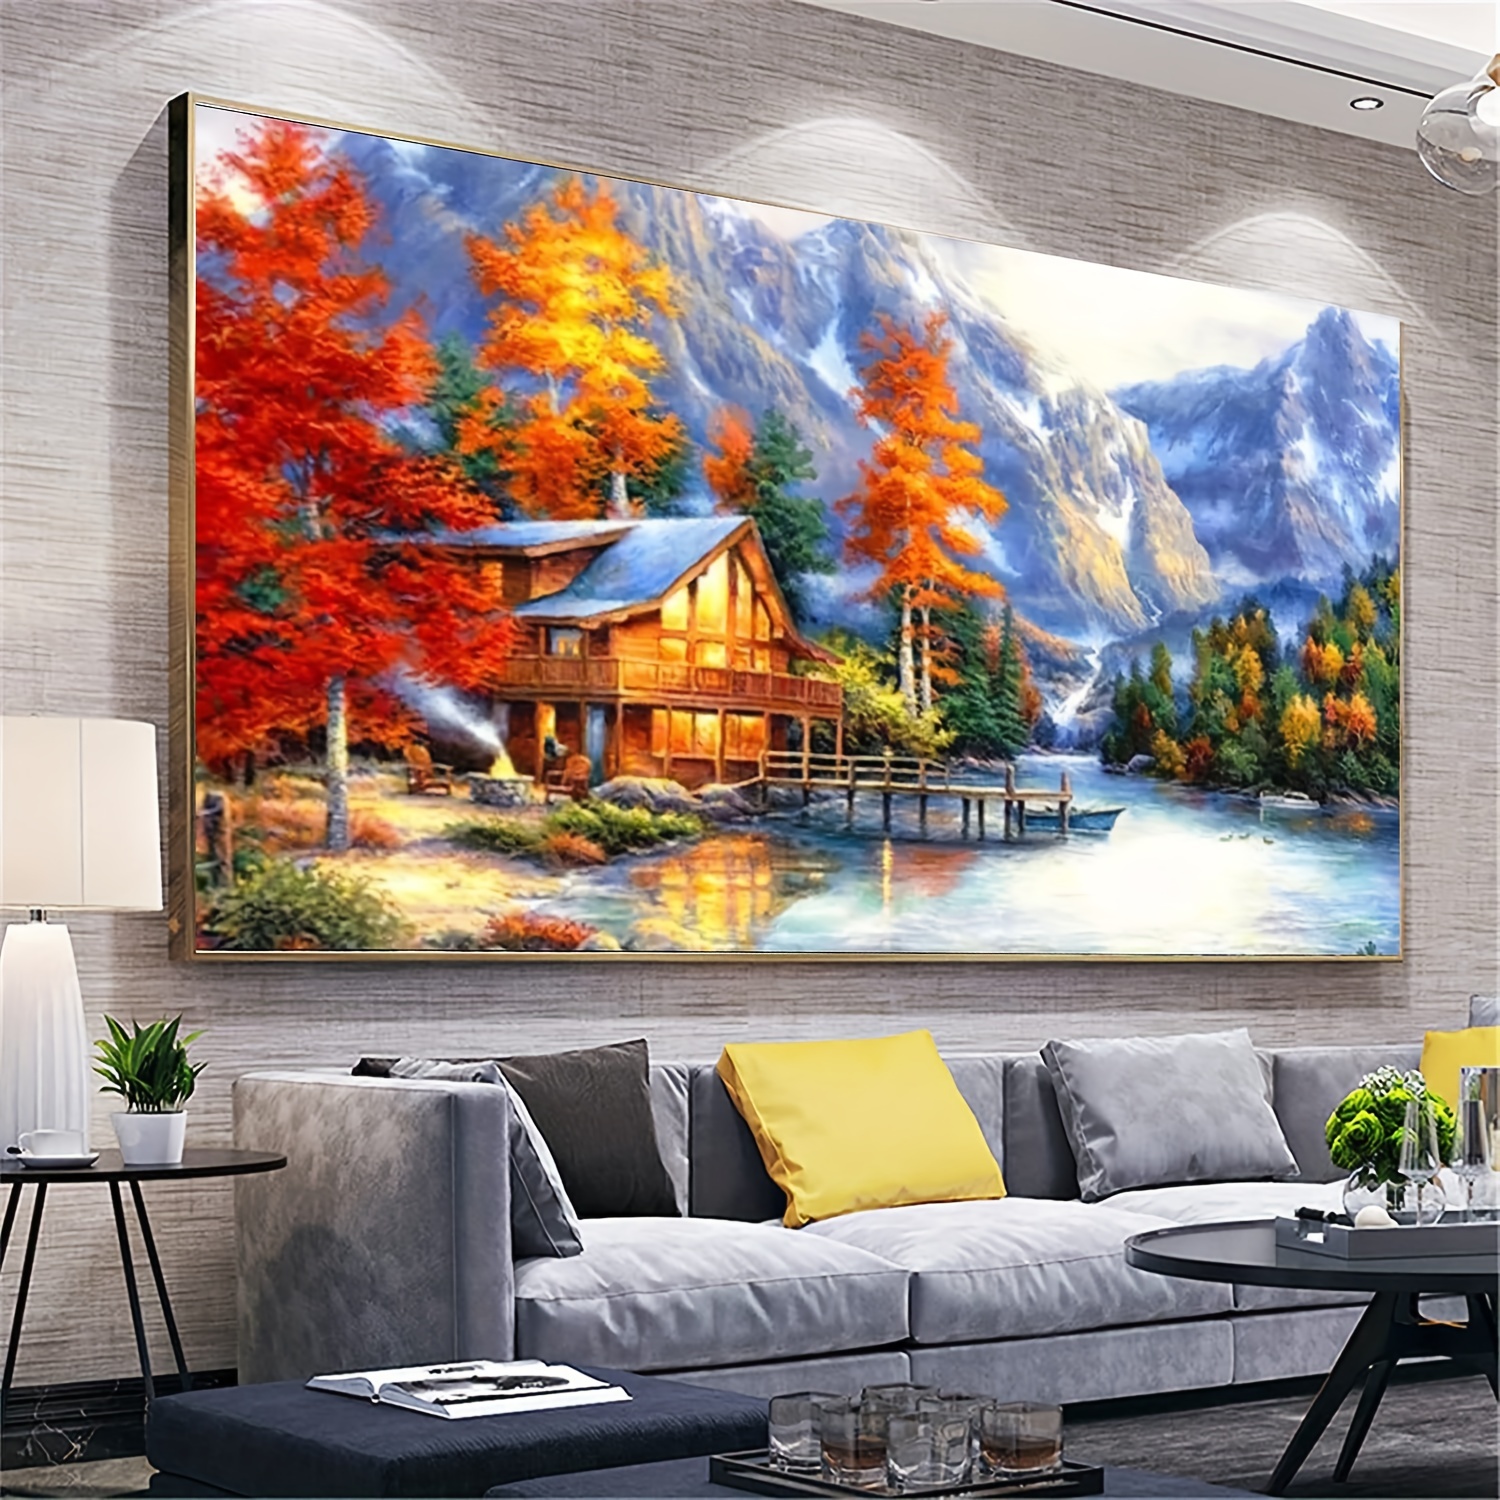 Best Deal for DIY 5D Large Diamond Painting Kits Natural Scenery